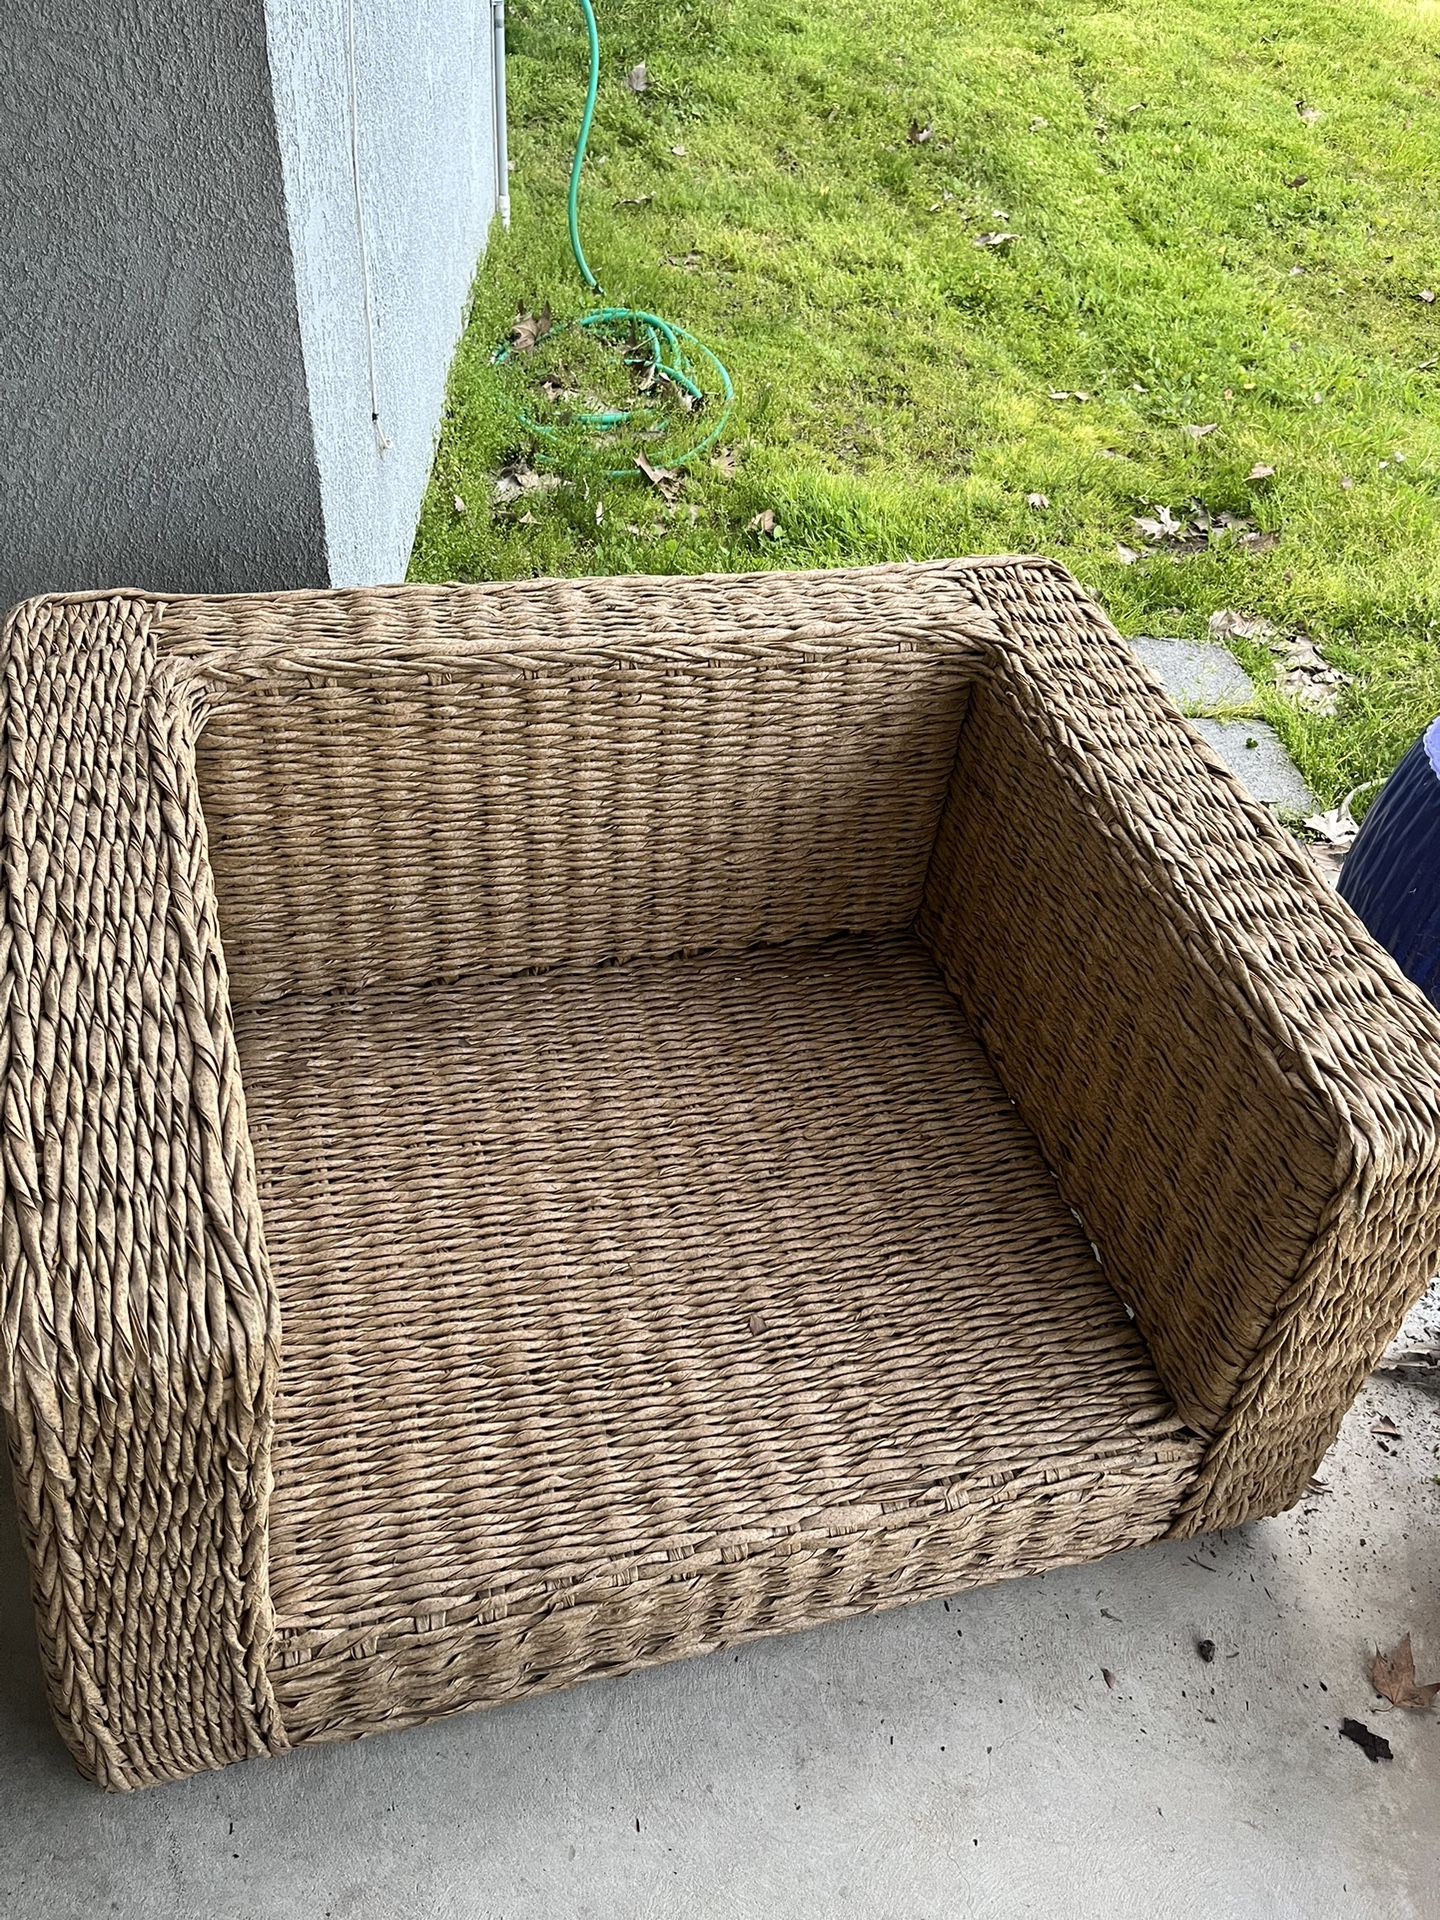 Wicker Chair Large Big Low To Ground Beige 